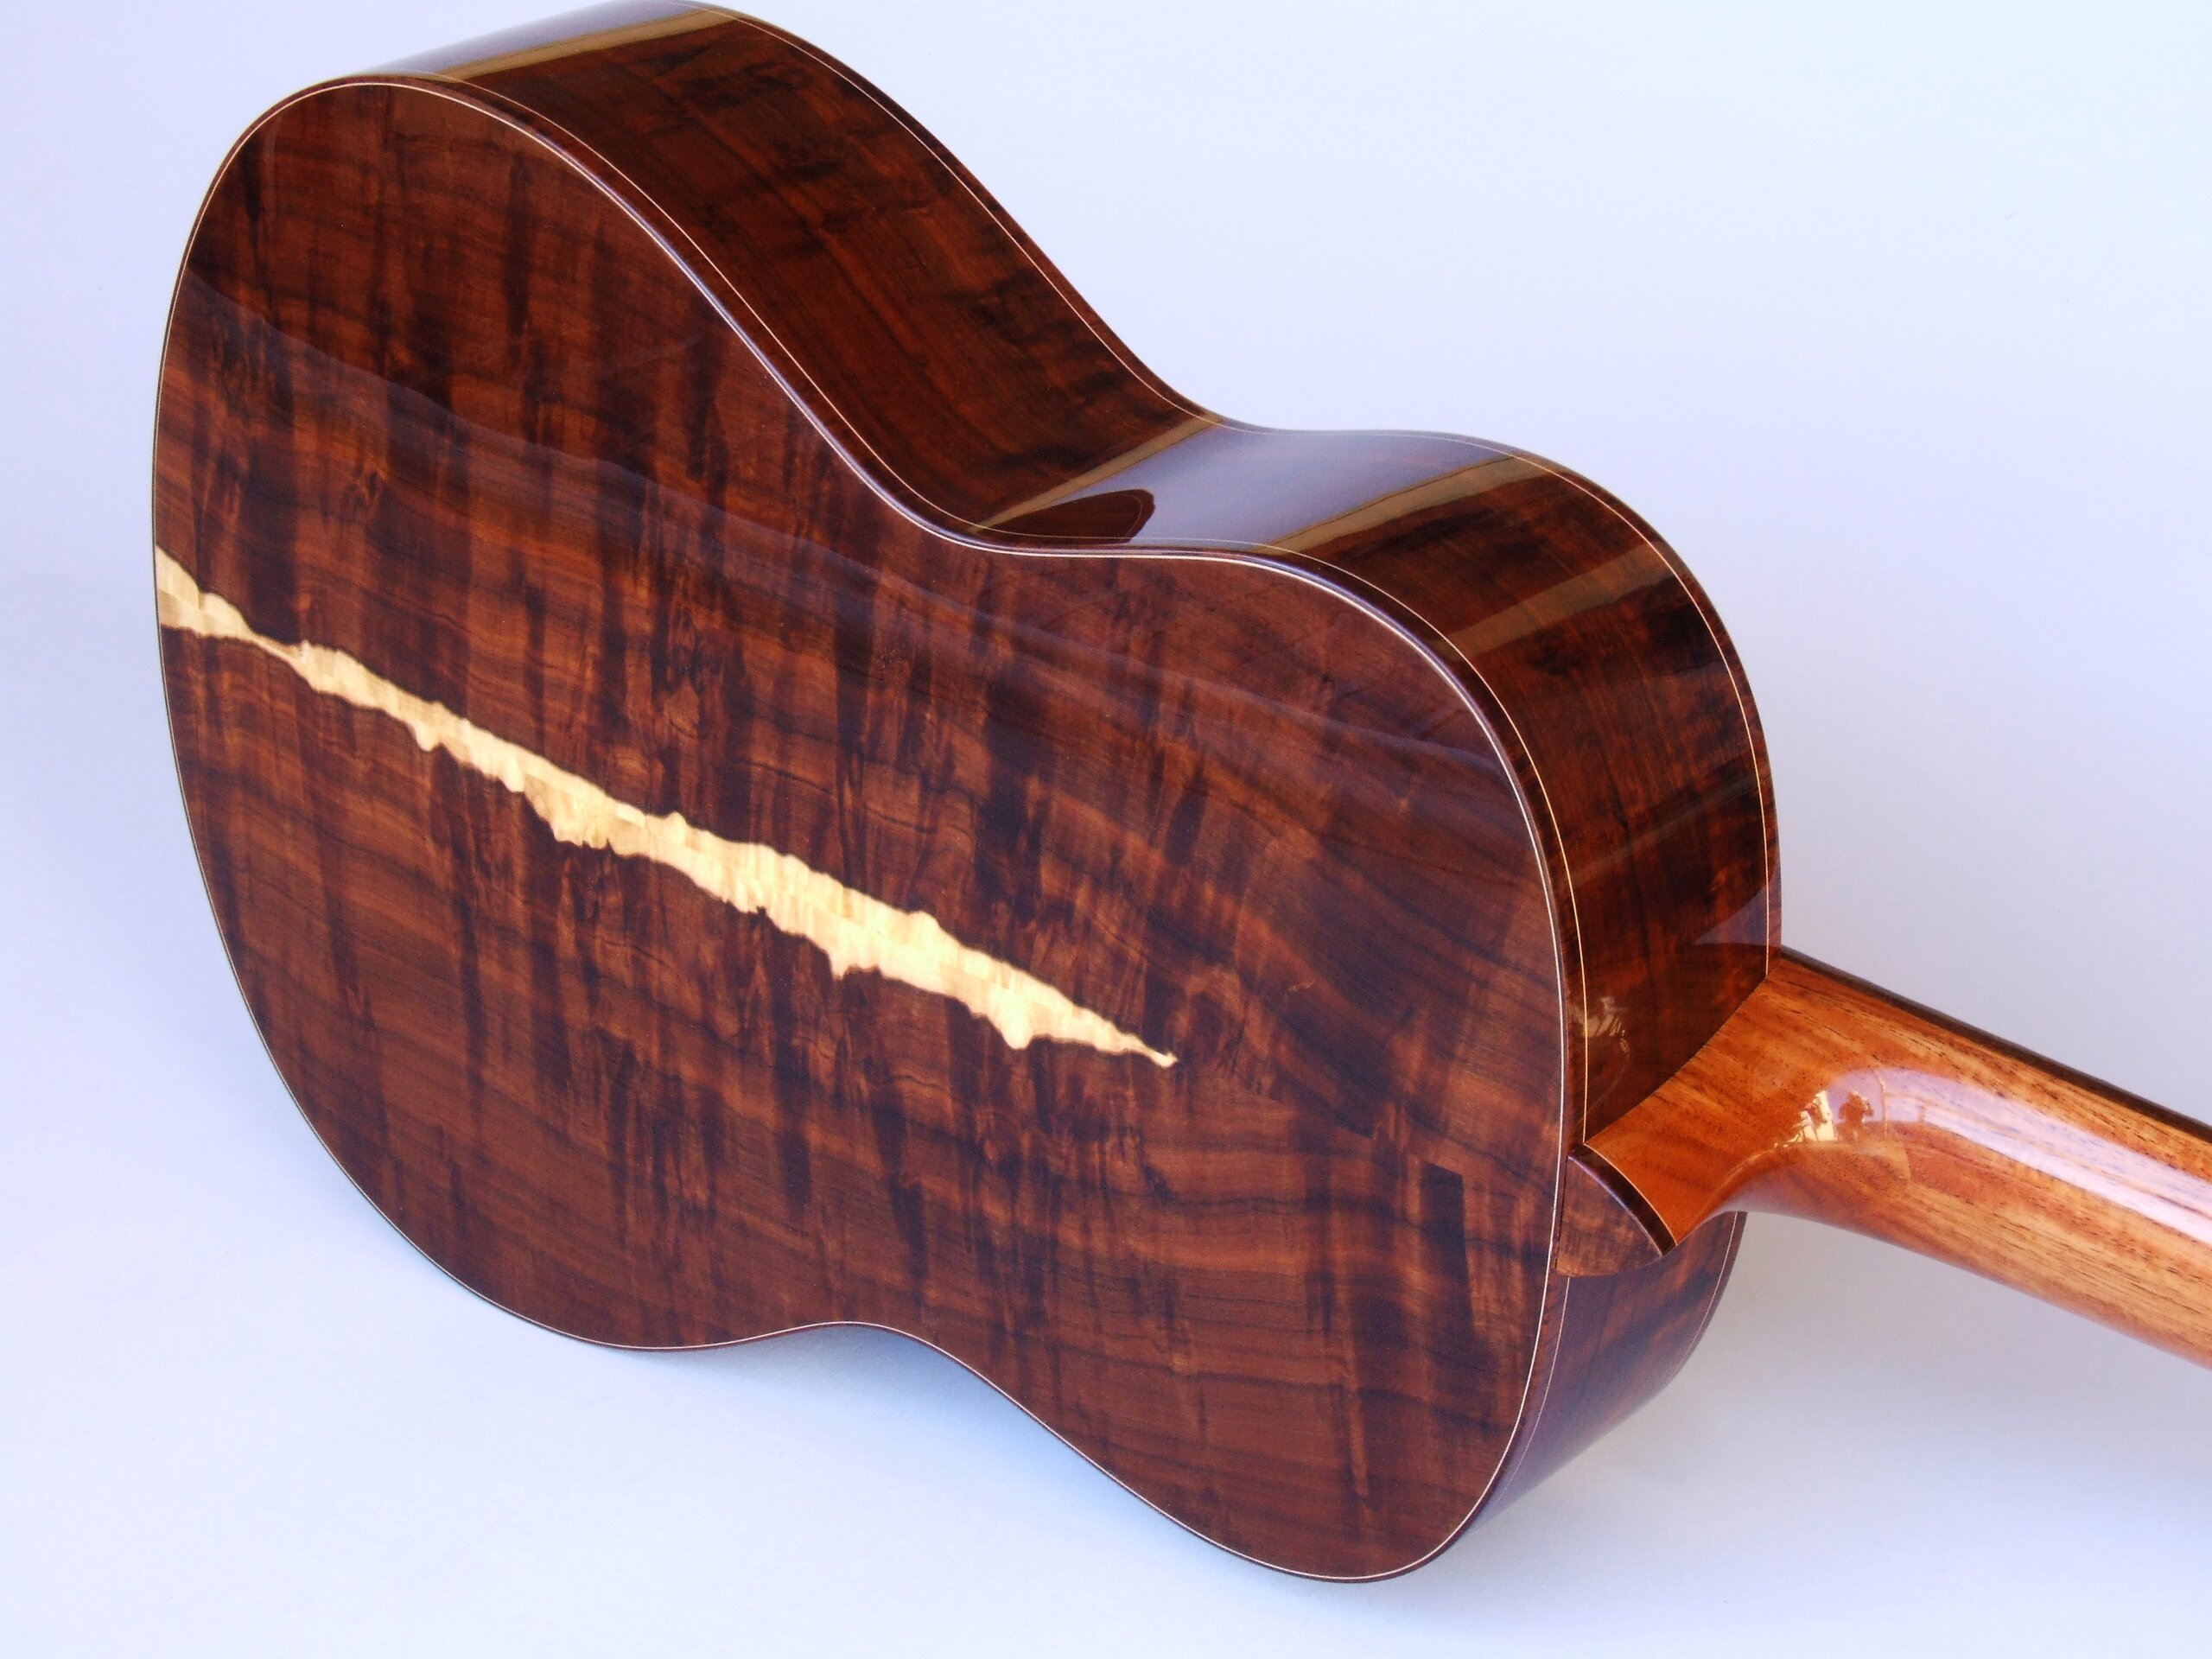 Custom guitars. Classical guitar, gidgee back and sides with sapwood centre